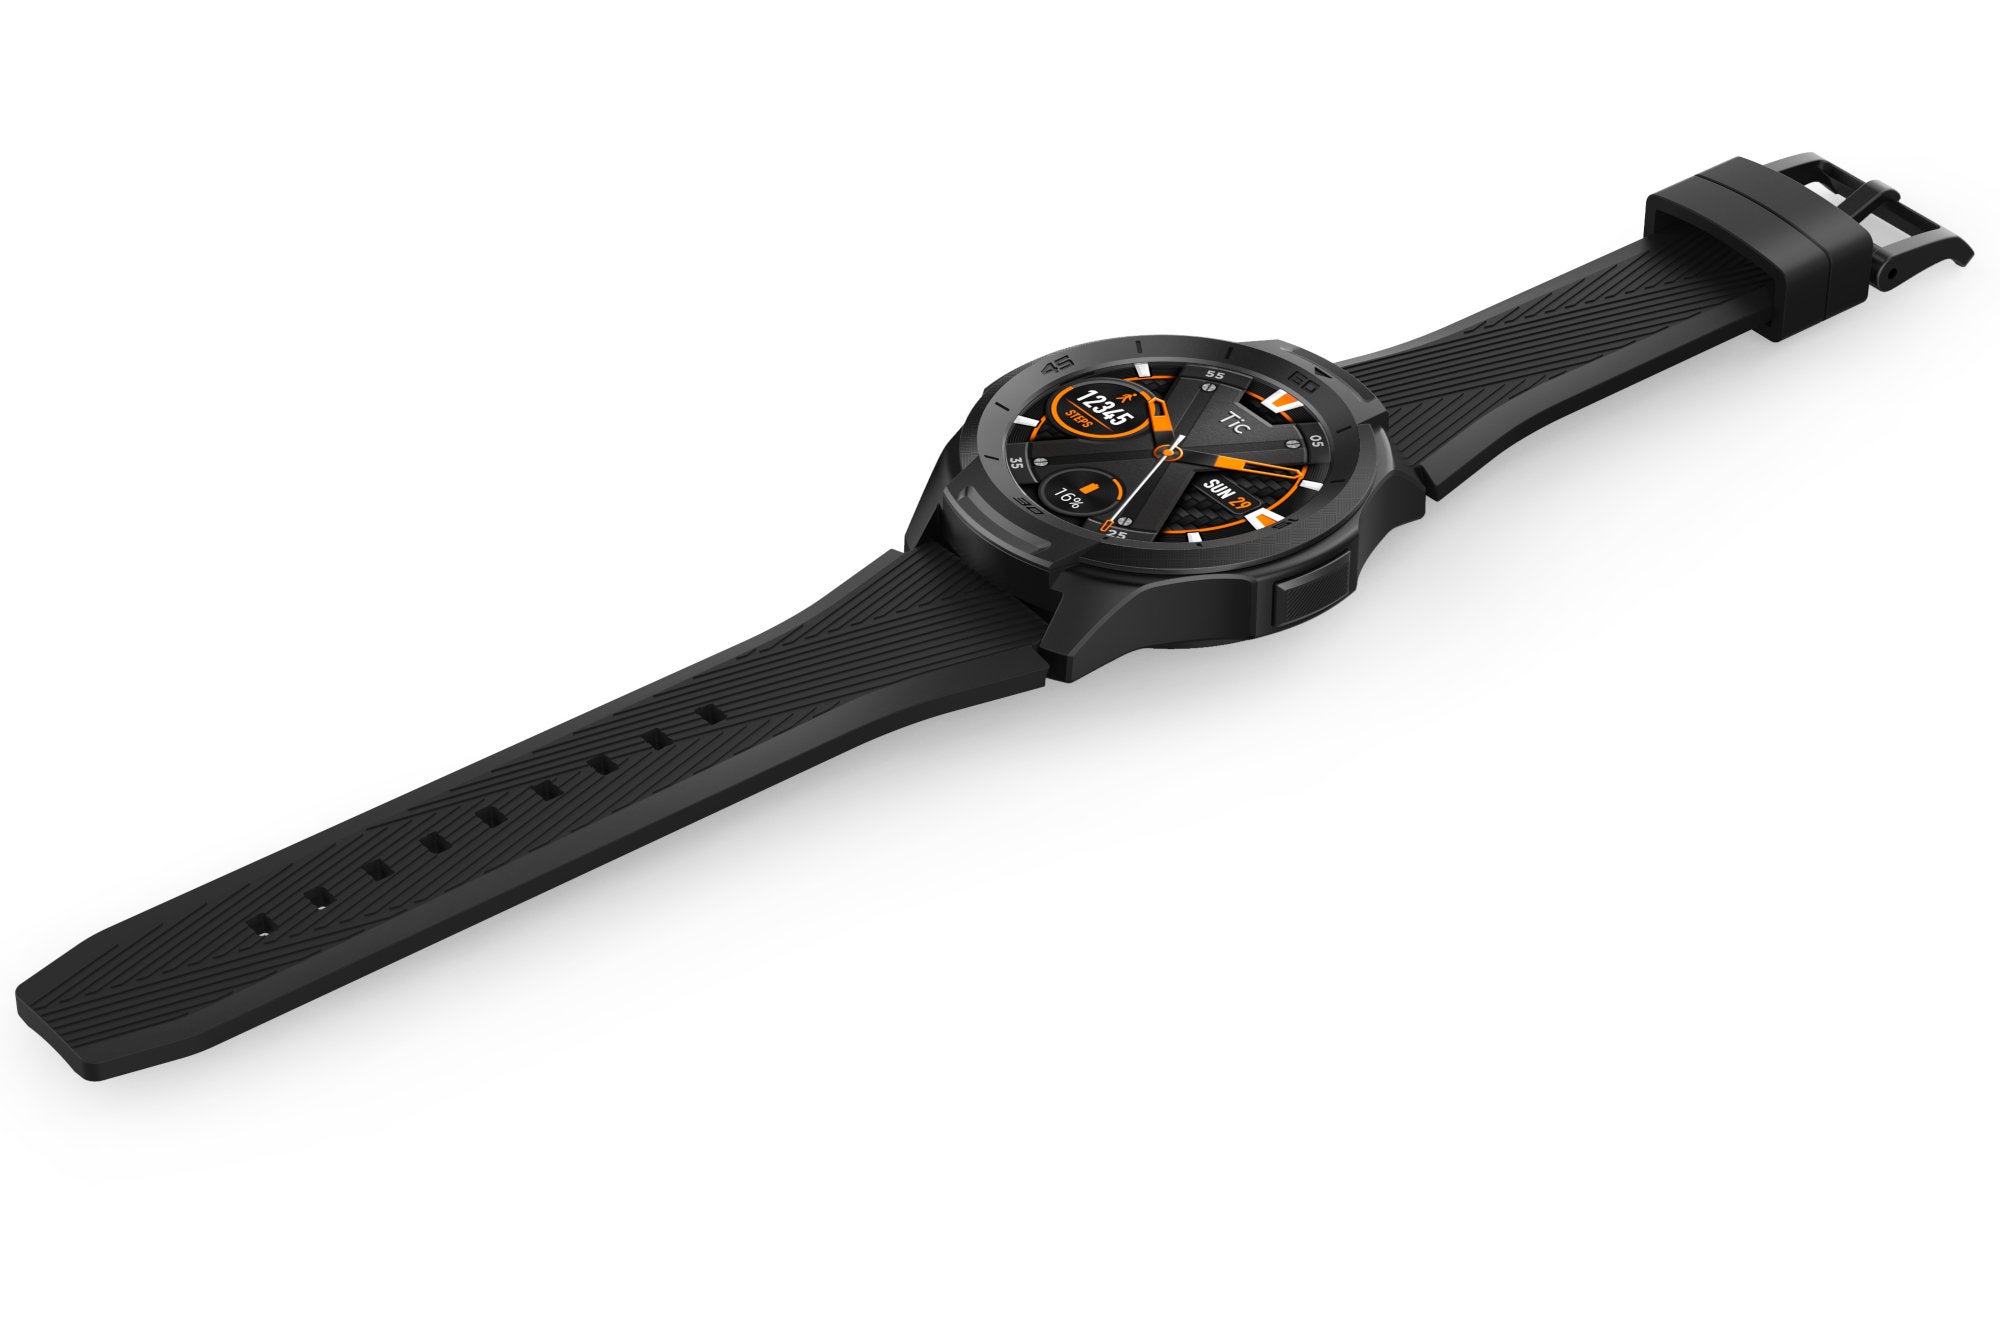 TicWatch S2 - Affordable TicWatch E2 and TicWatch S2 smartwatches now available in the U.S.